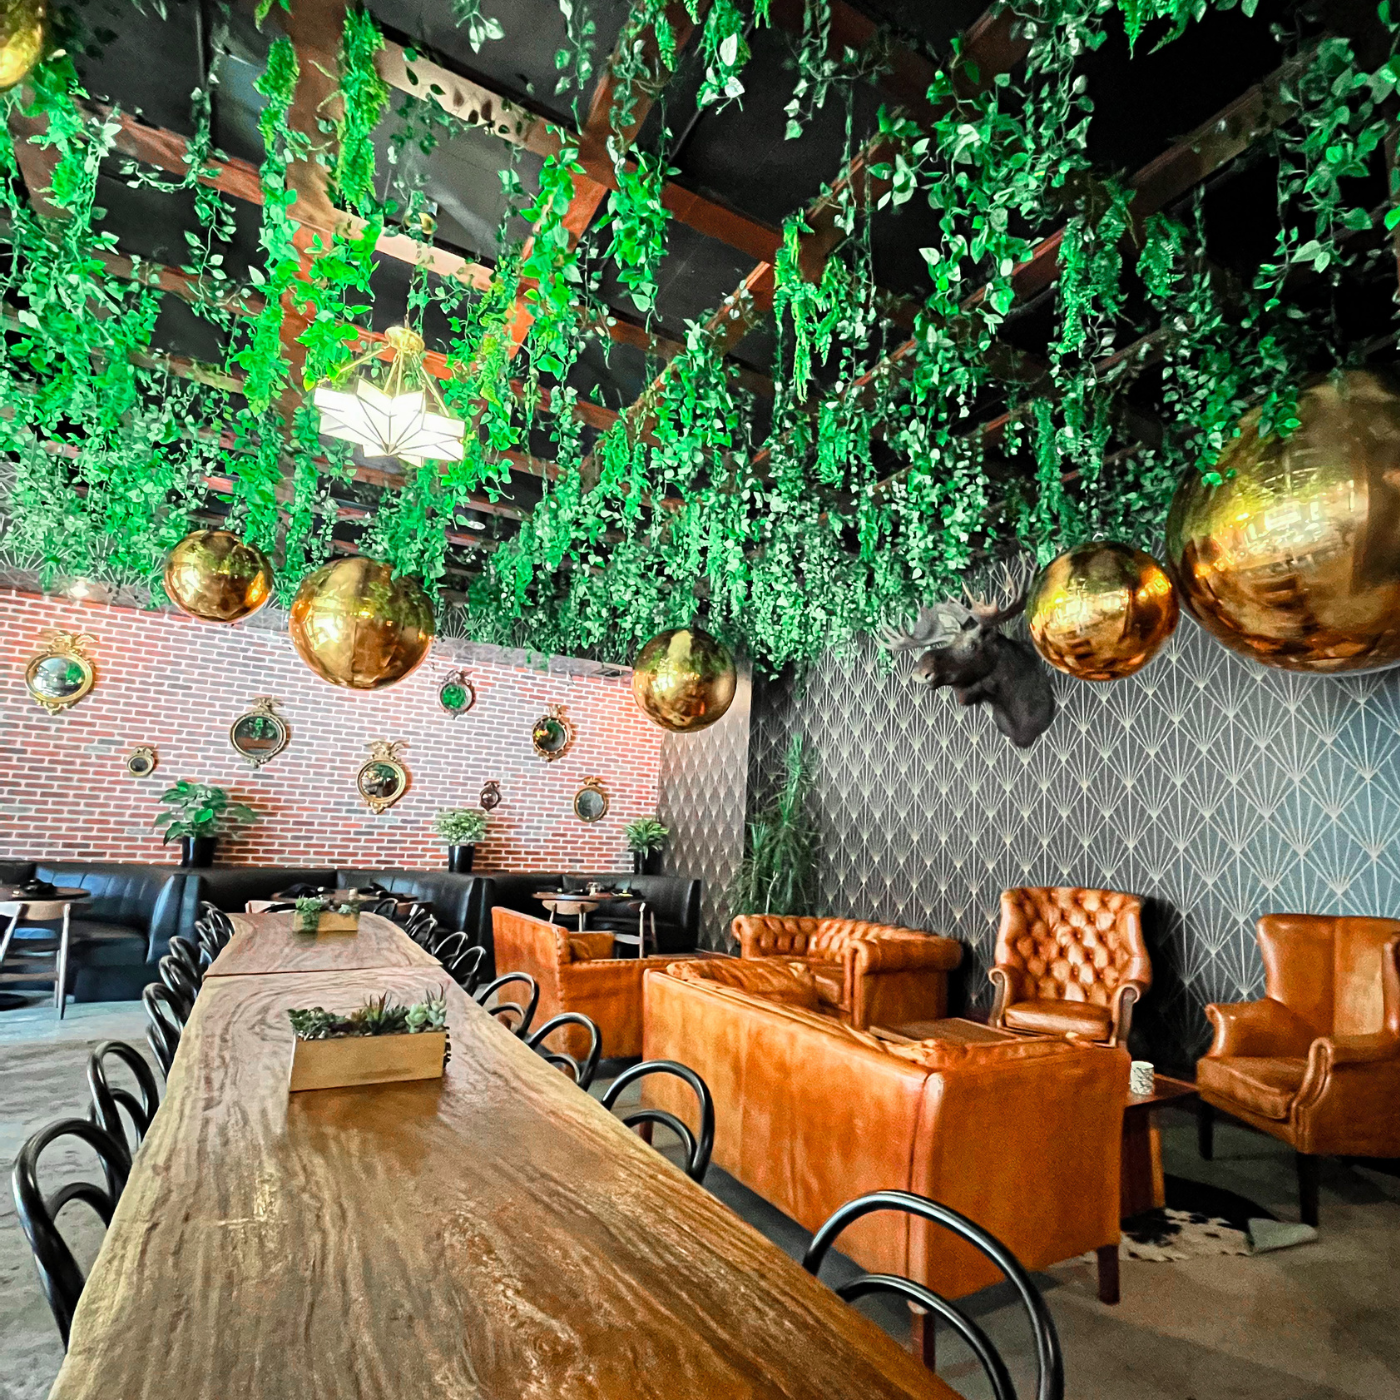 Green branches extend in layered rows down from the ceiling of a dining room at Western Proper. The tables below are wooden, with black wire chairs. Several small groupings of leather furniture are on the right side of the room. The wall to the left is exposed brick. The wall to the right features a black and gold art deco design with a black background and rows of connected gold diamond pattern lines extending upward.